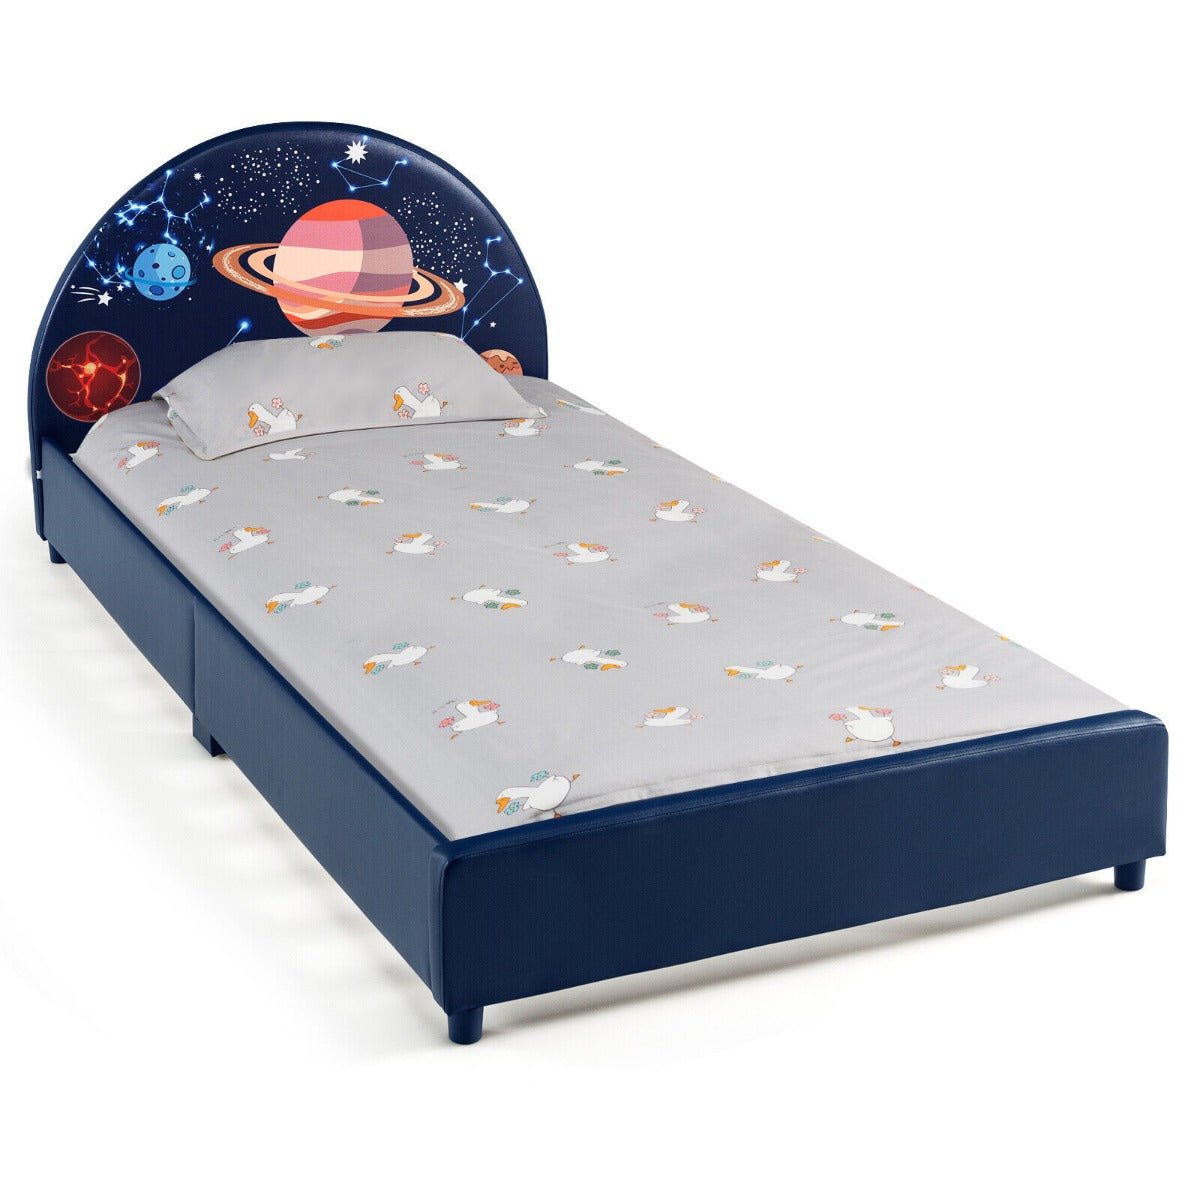 Cozy Blue Bed with Planetary Motif